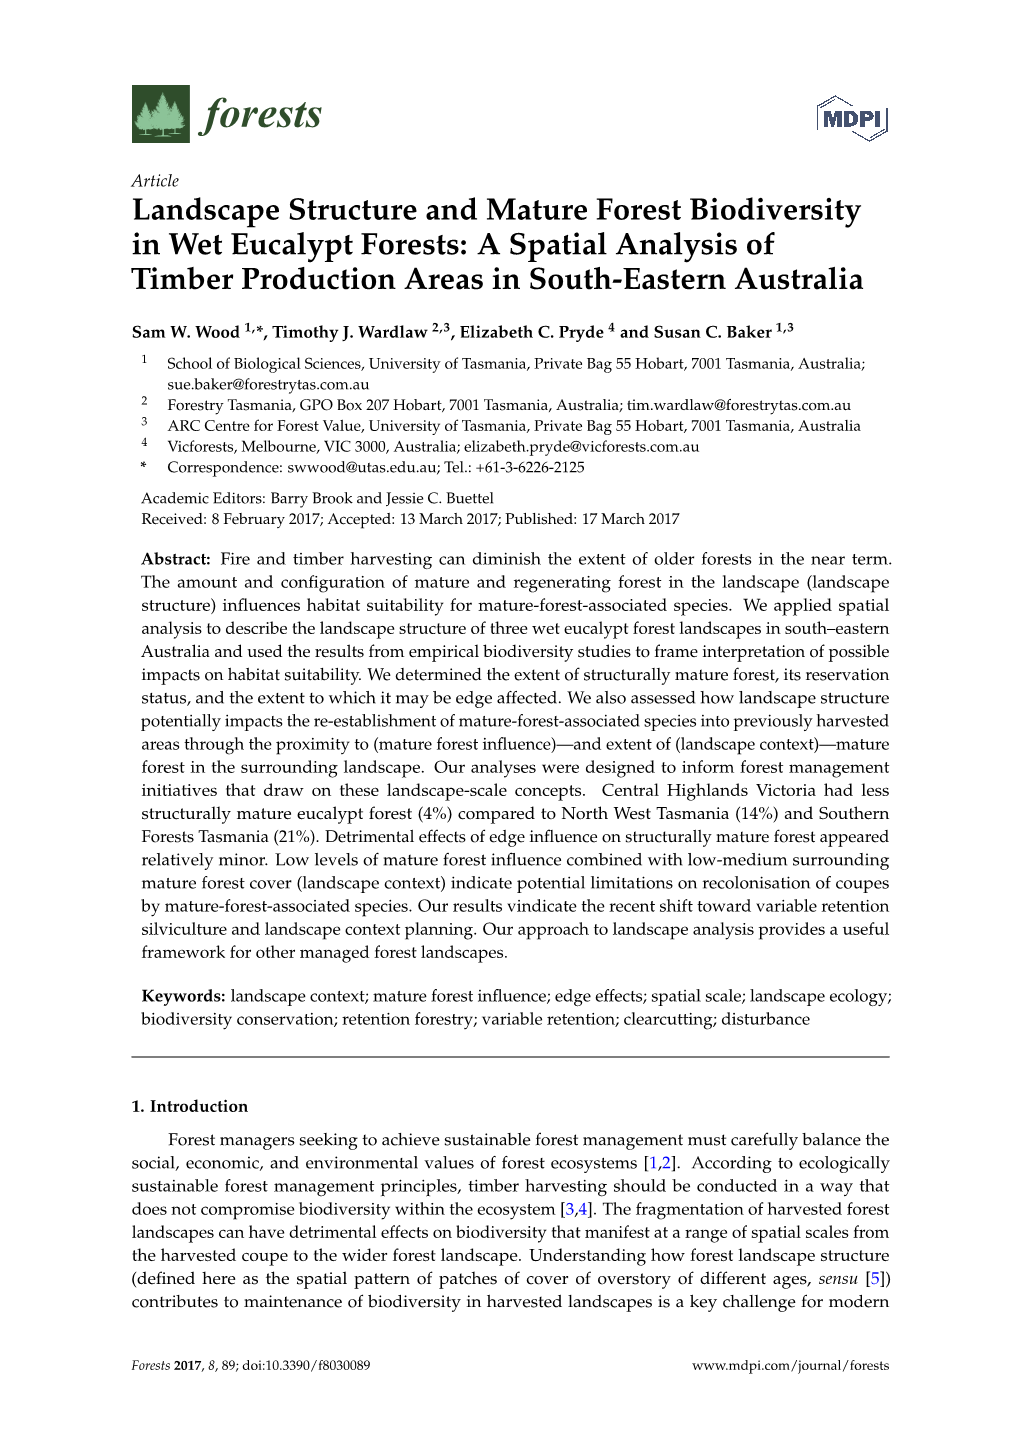 Landscape Structure and Mature Forest Biodiversity in Wet Eucalypt Forests: a Spatial Analysis of Timber Production Areas in South-Eastern Australia